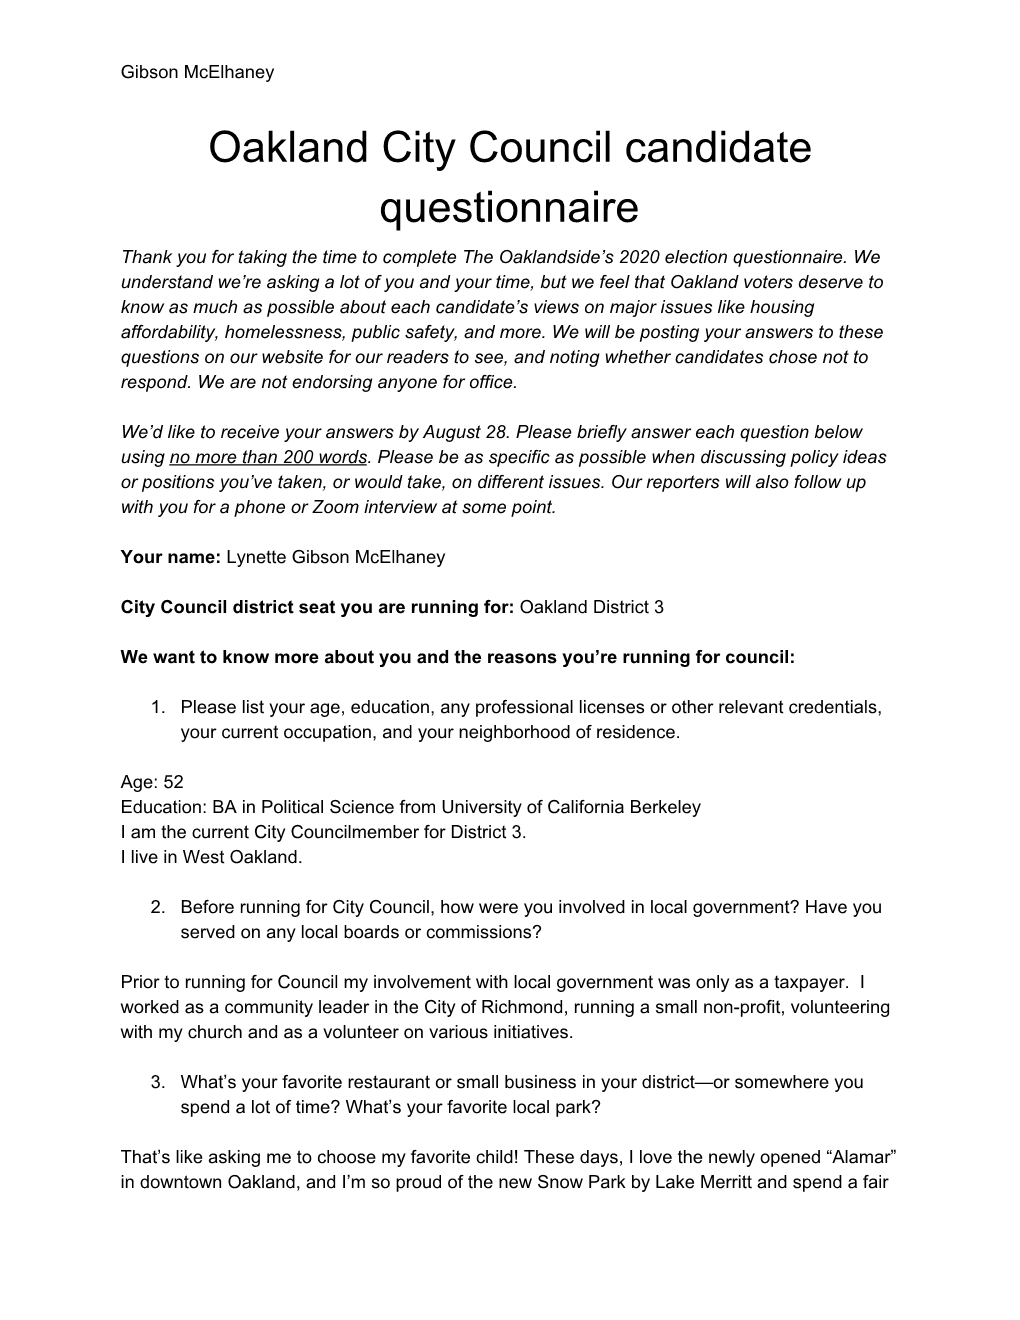 Oakland City Council Candidate Questionnaire Thank You for Taking the Time to Complete the Oaklandside’S 2020 Election Questionnaire